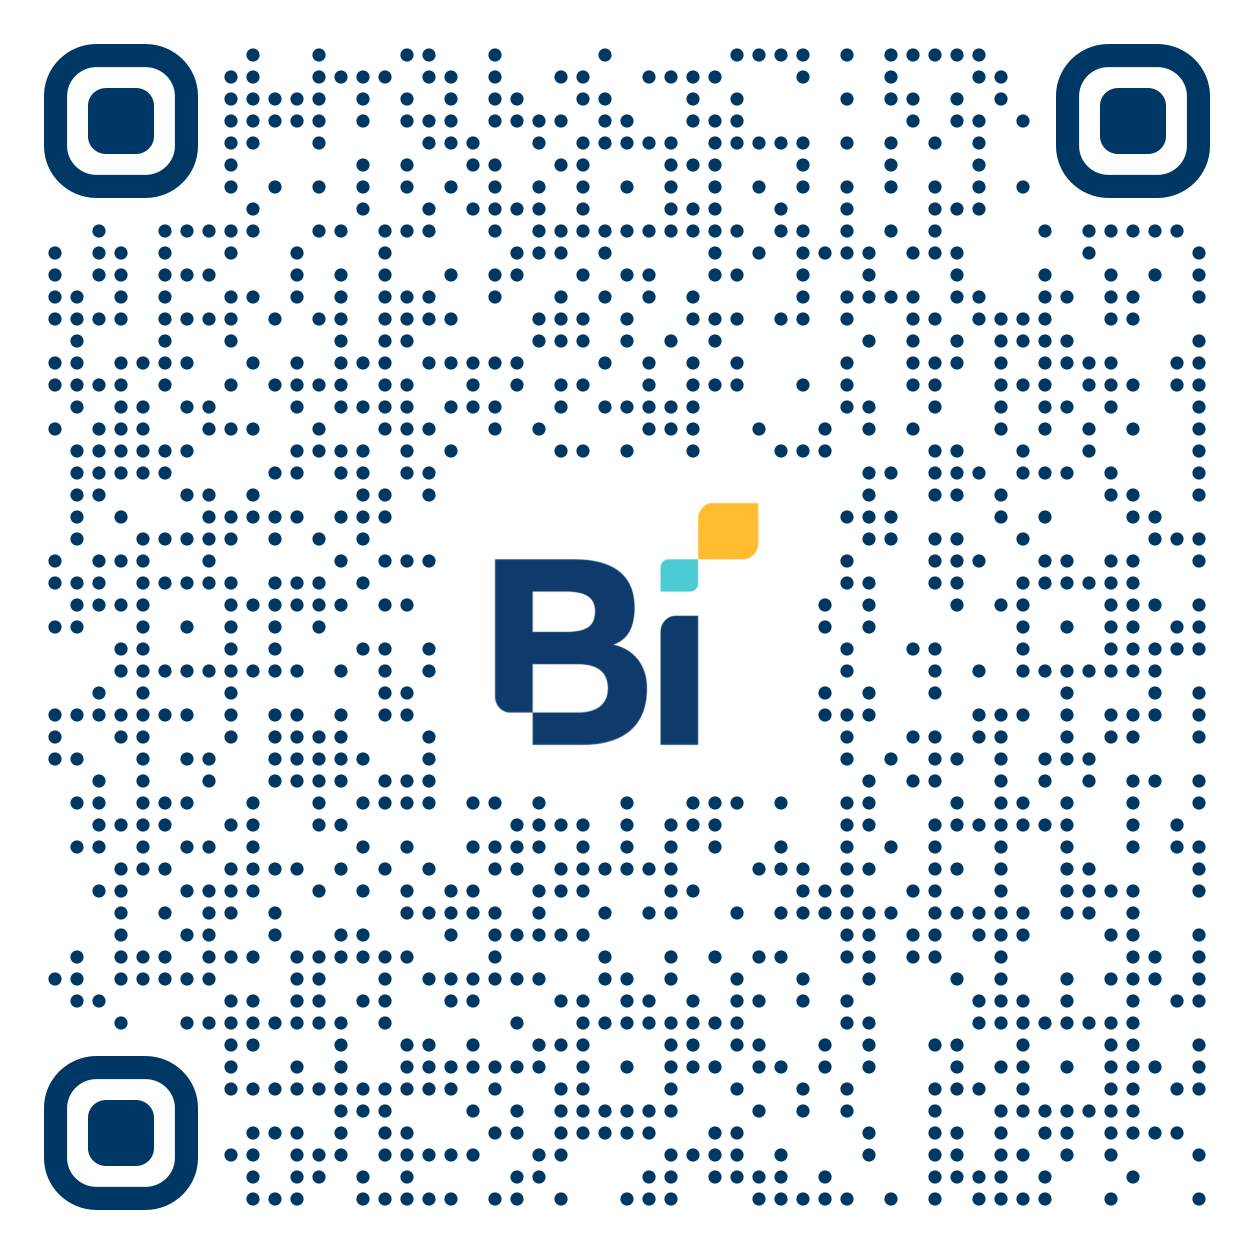 QR code for scanning and navigate to view on mobile